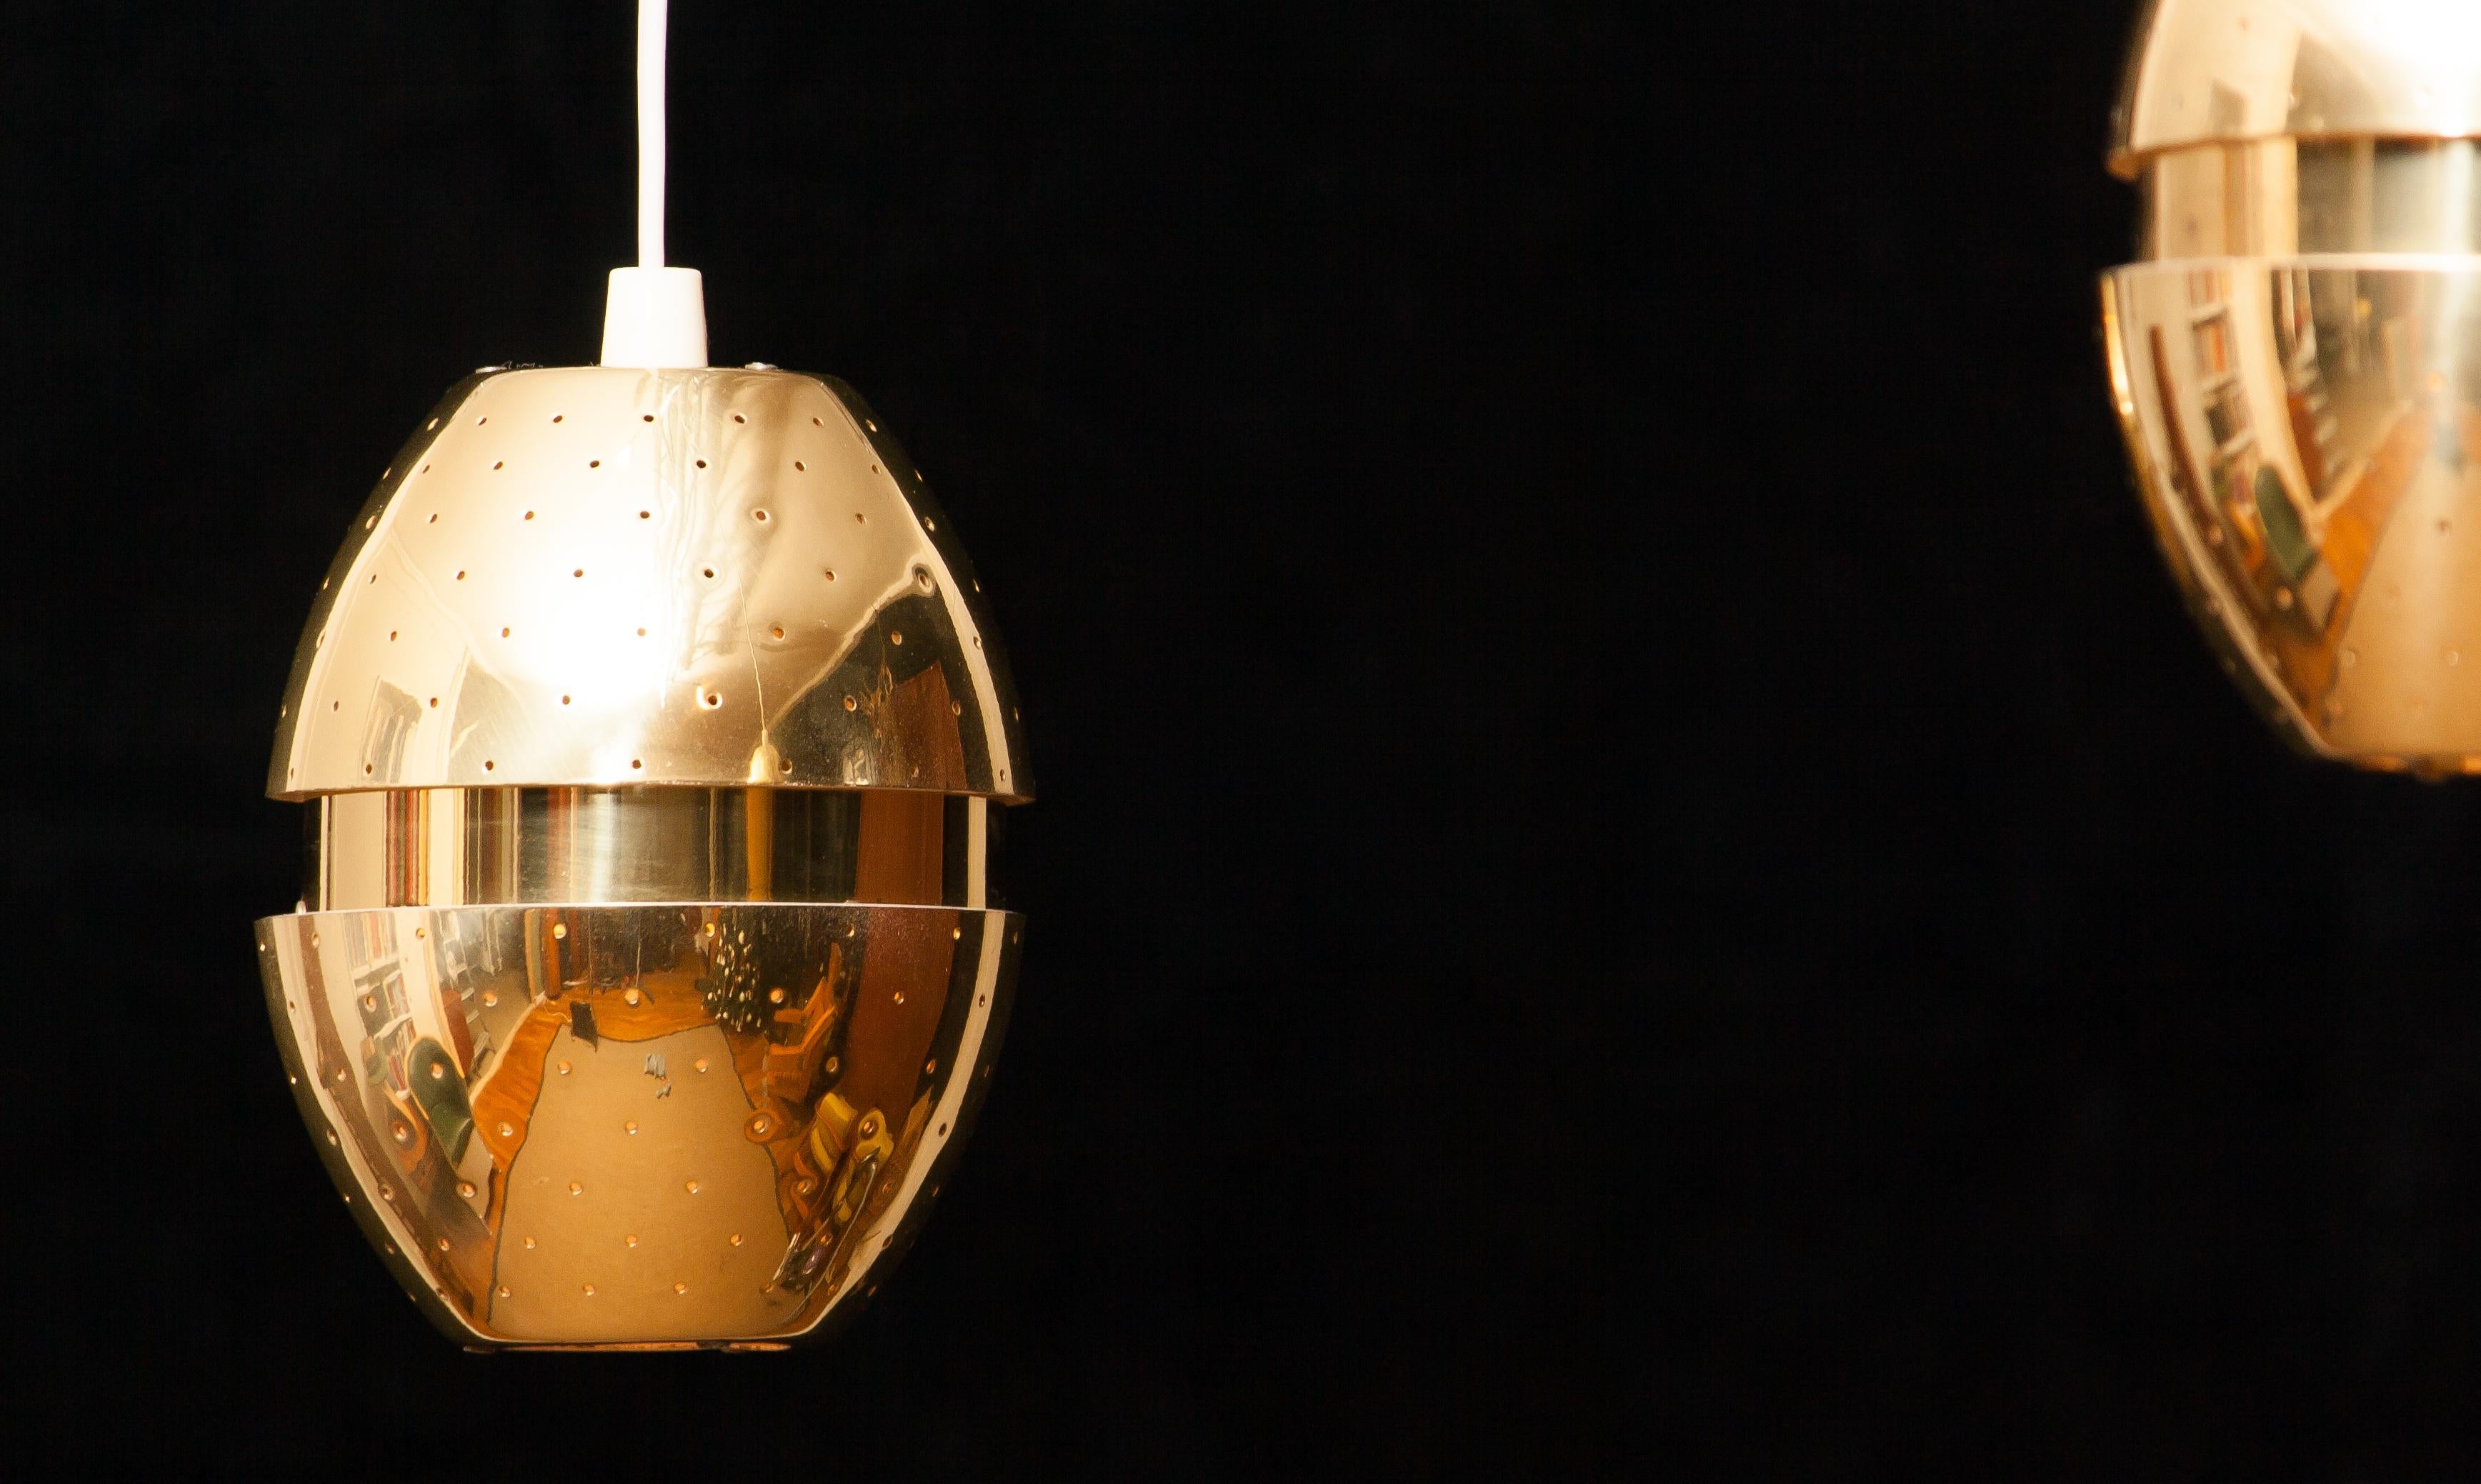 A beautiful pendant light designed by Hans-Agne Jakobsson Sweden.
This lamp is made of brass and is perforated with gives a very nice shining.
It is in an excellent condition.
Period 1950s
Dimensions: H 14 cm, ø 12 cm.